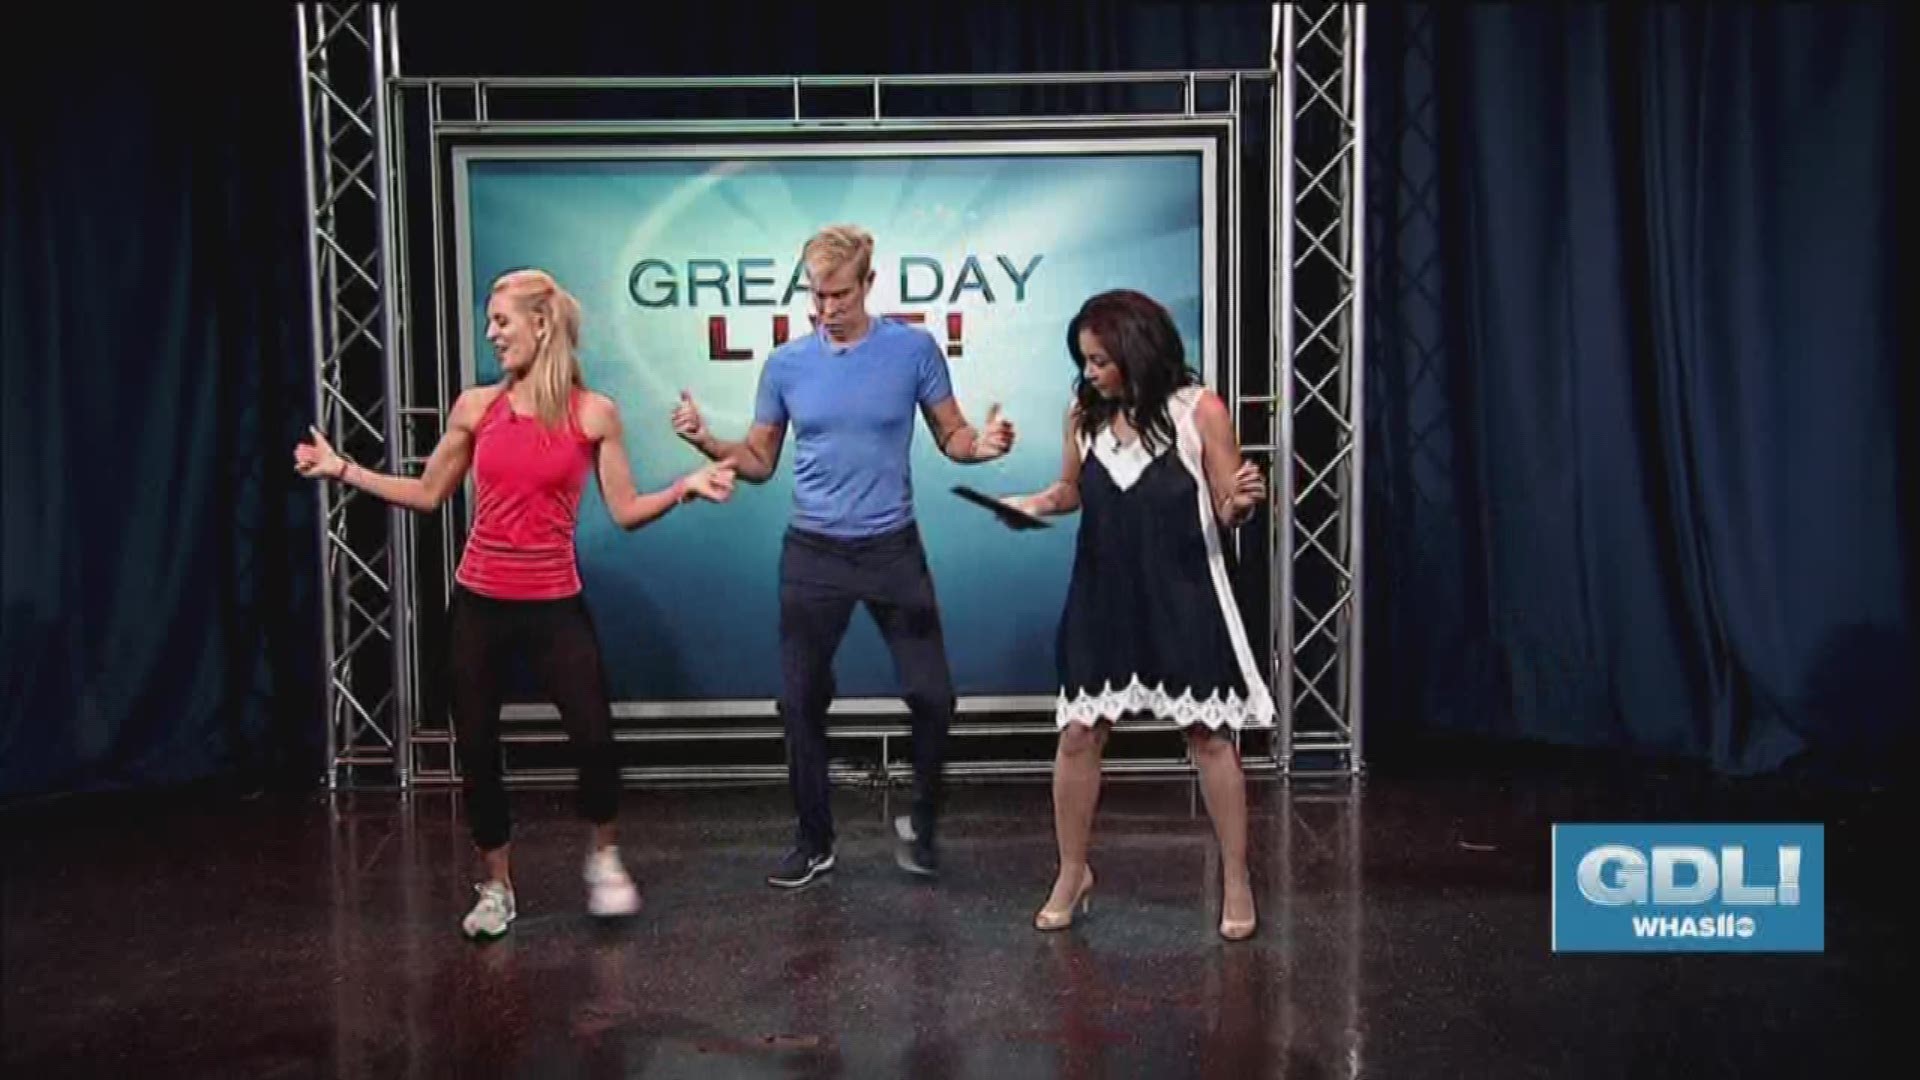 Fitness instructors Jeff Howard and Alison Cardoza stopped by Great Day Live to show how to incorporate the fun of dancing into your every day routine.